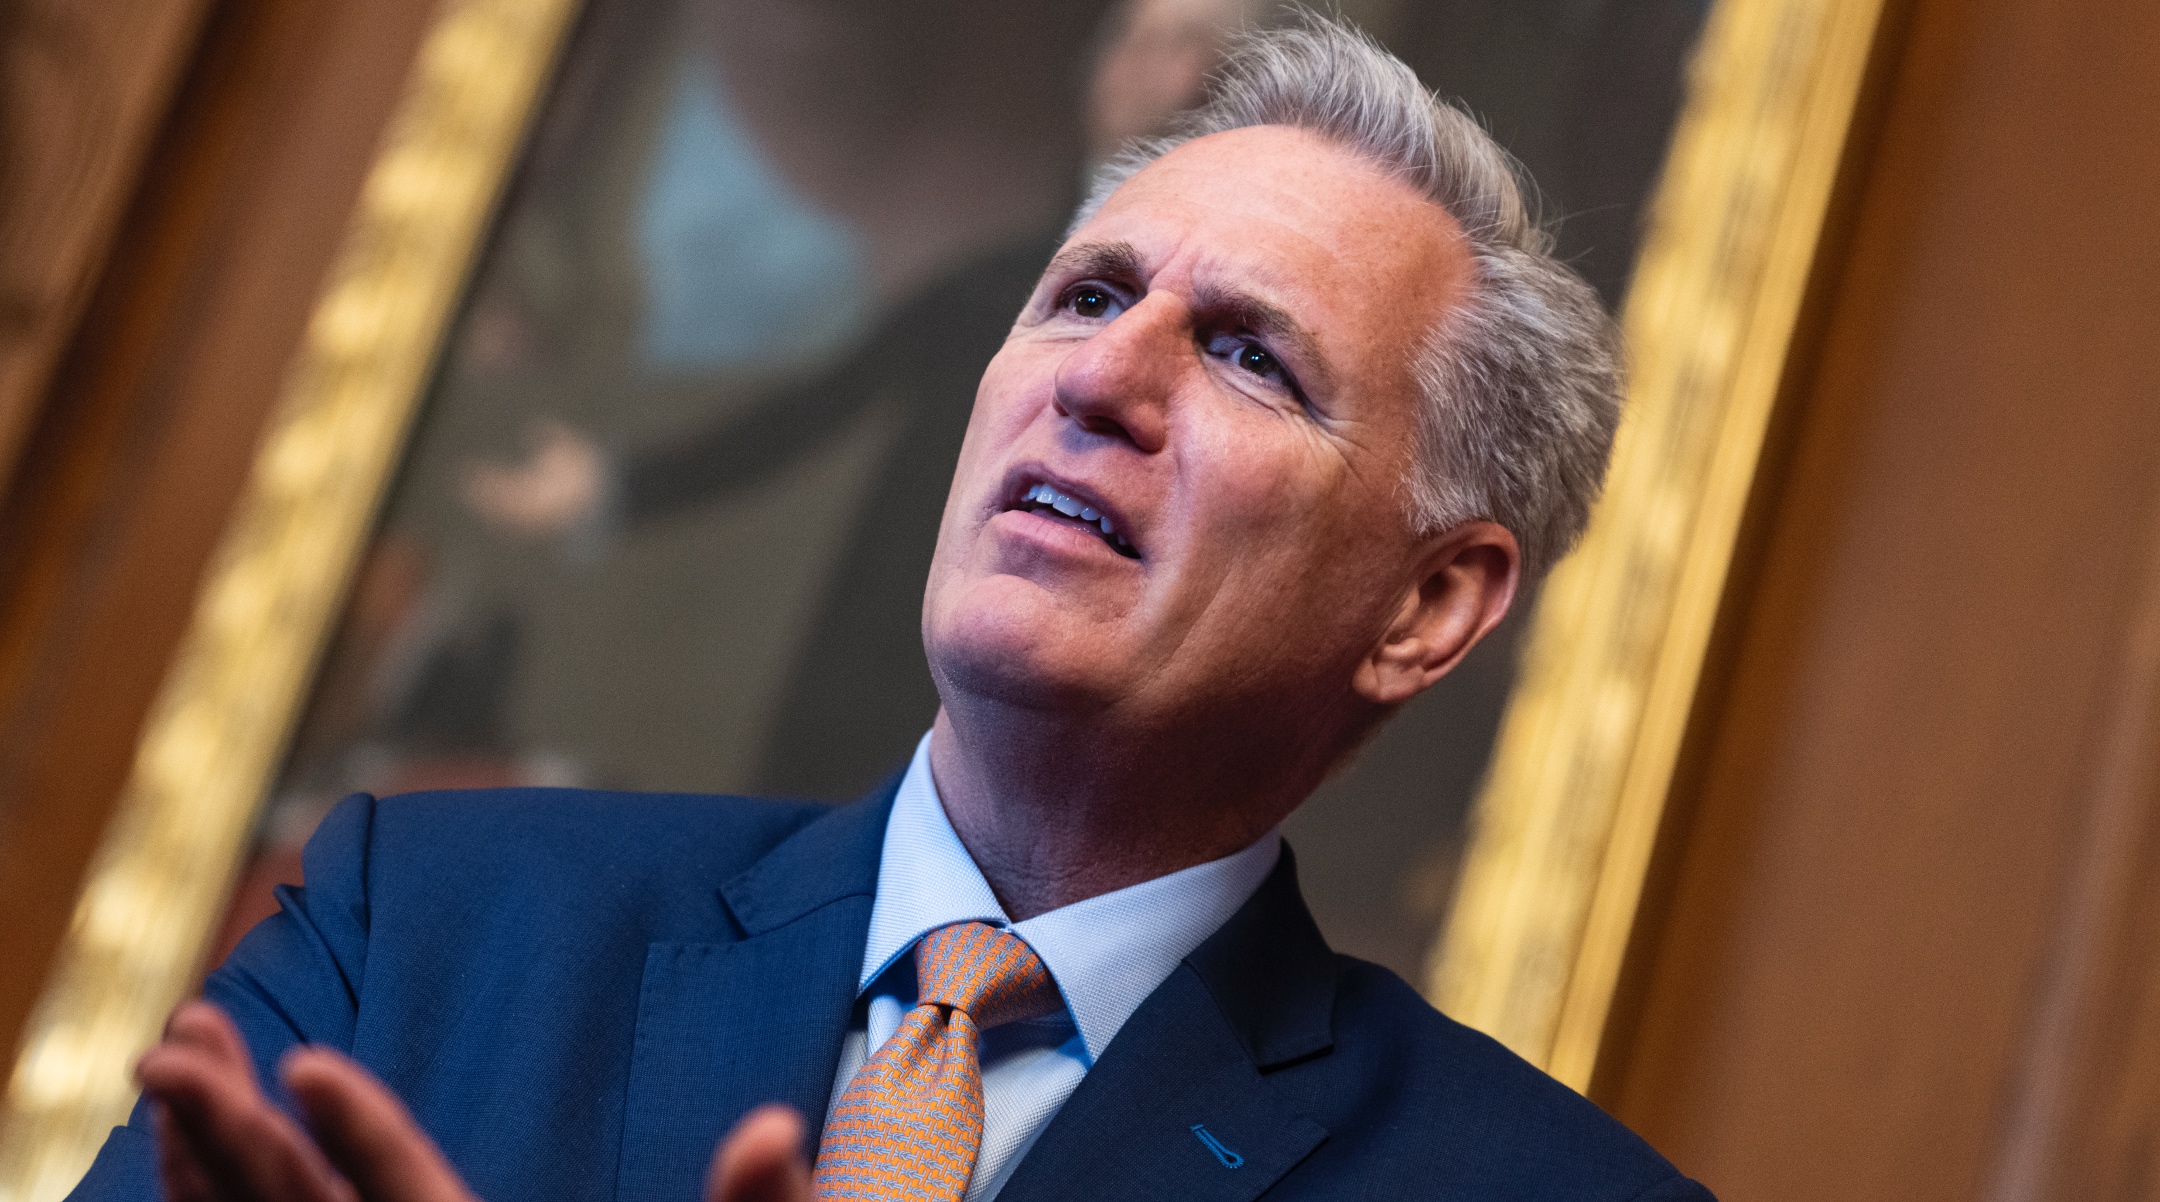 Speaker of the House Kevin McCarthy is seen in the U.S. Capitol, April 20, 2023. (Tom Williams/CQ Roll Call/Getty Images)